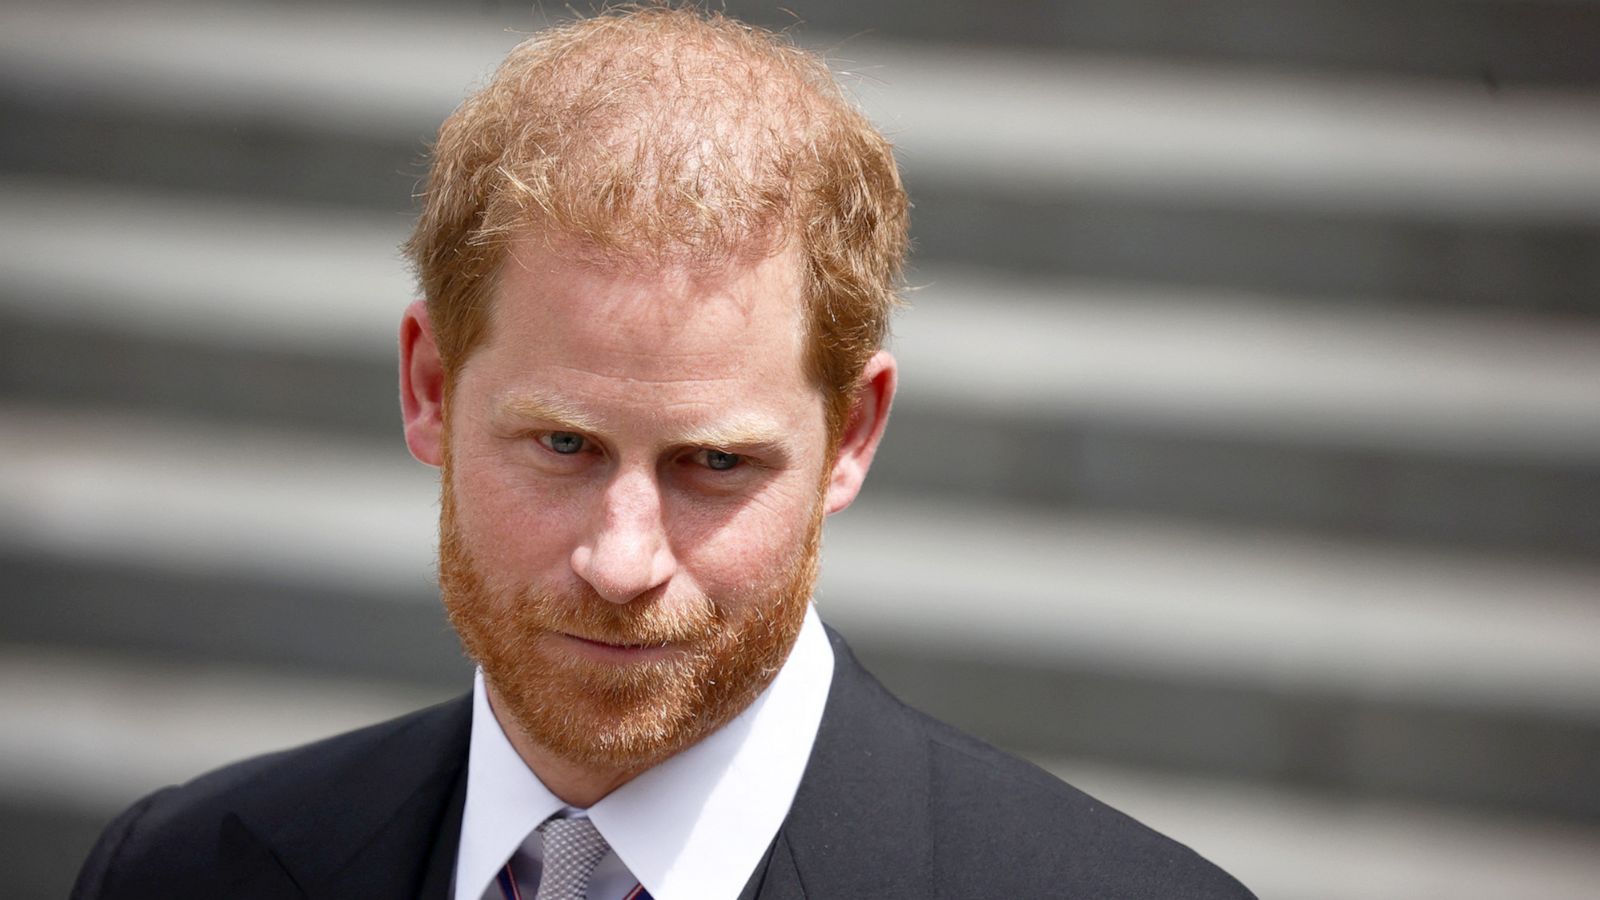 Prince William briefed the press about Prince Harry, author claims in new  book - Good Morning America